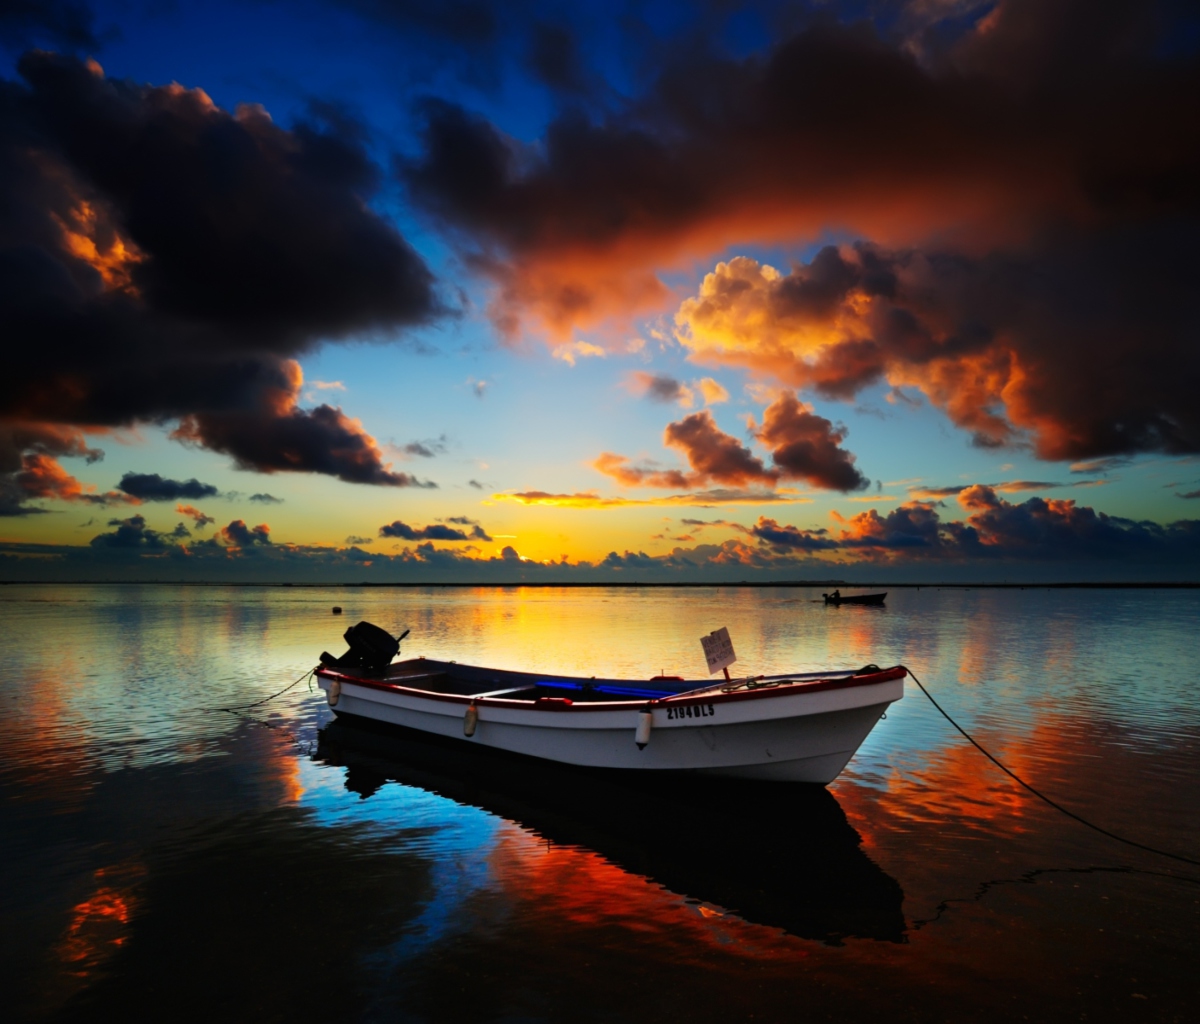 Das Boat In Sea At Sunset Wallpaper 1200x1024